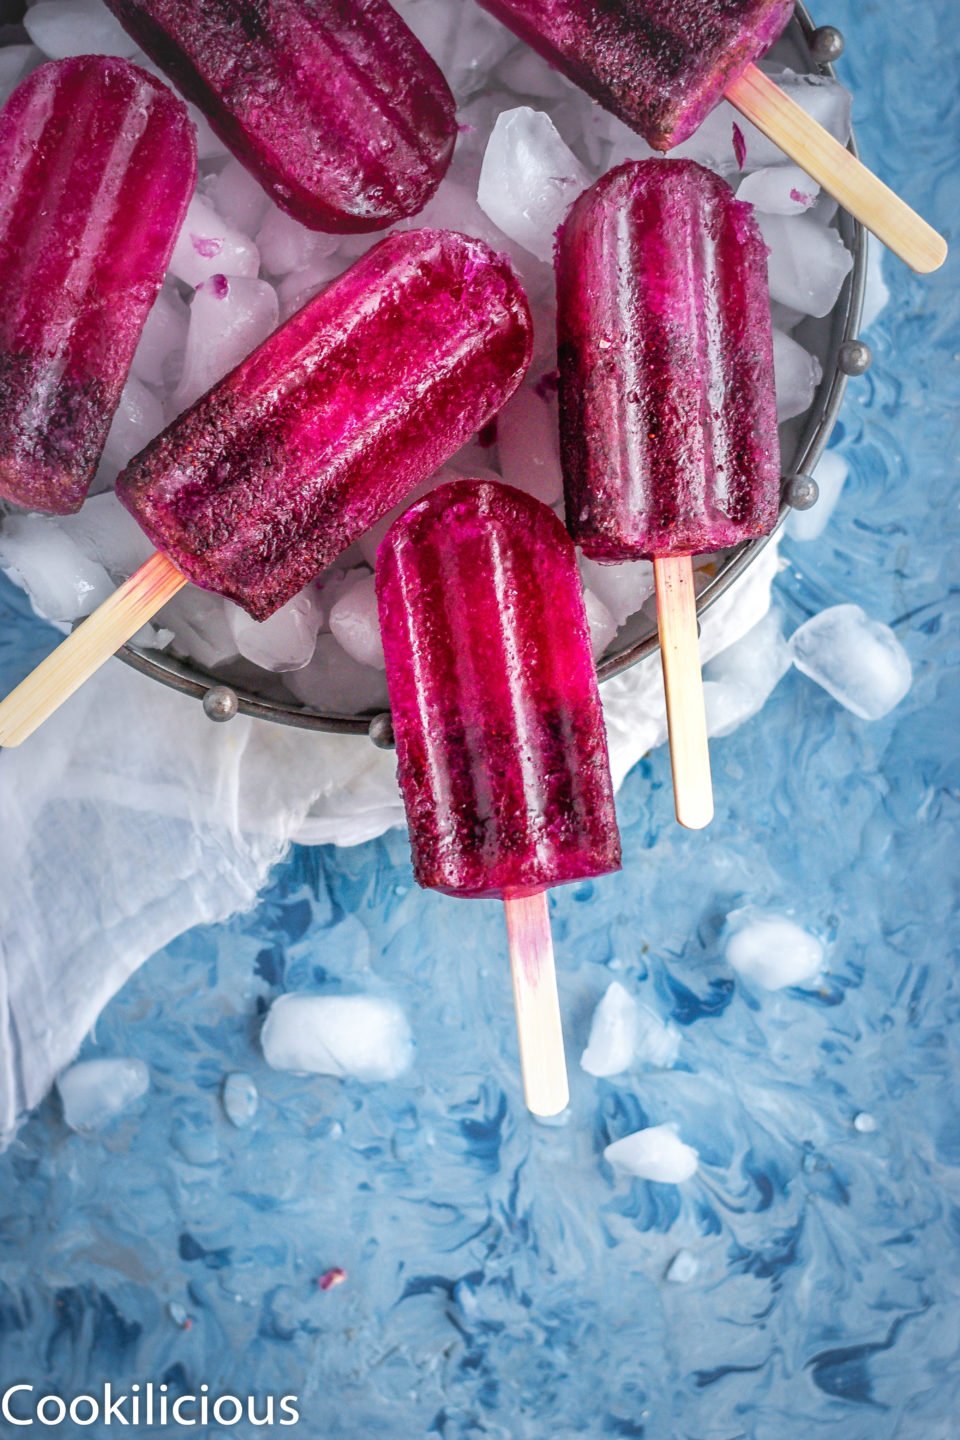 Masala Soda Blueberry Popsicles in a tray with ice cubes